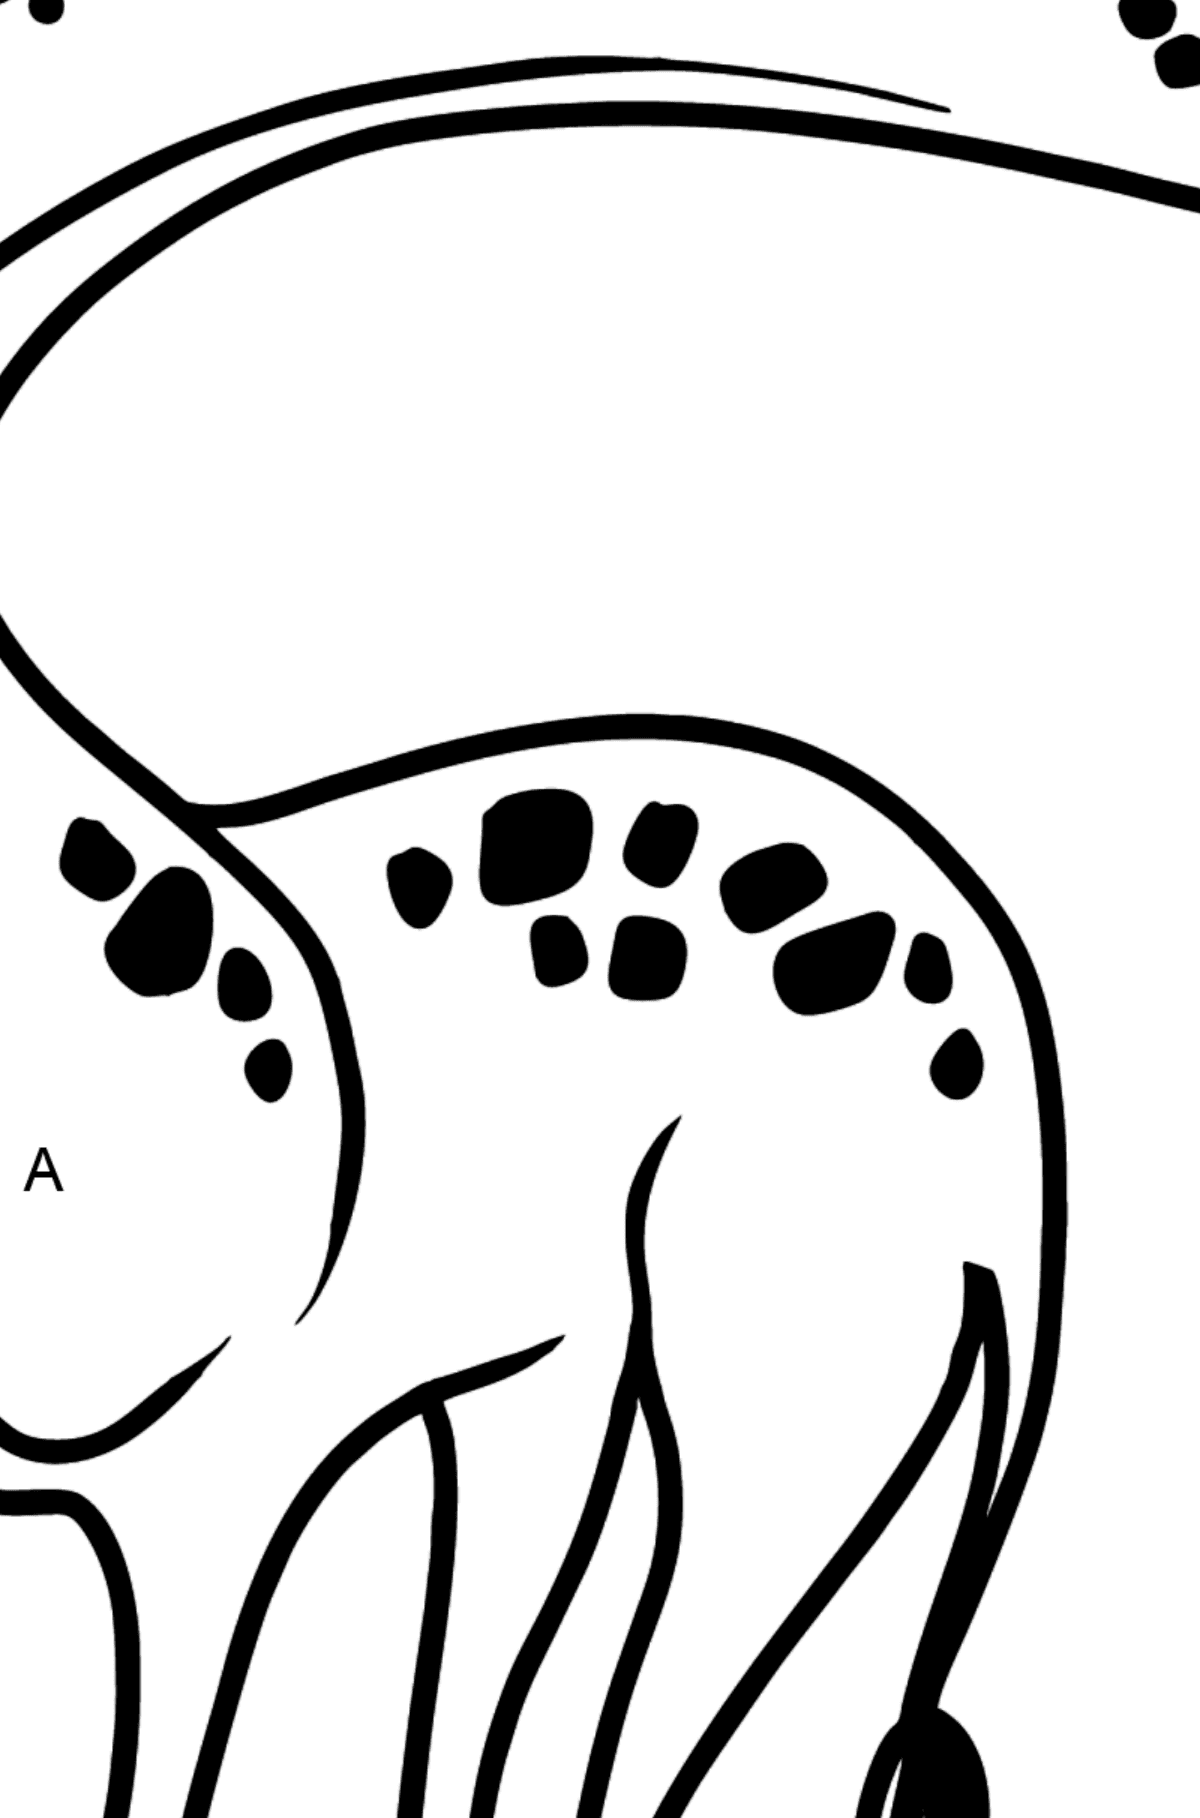 Giraffe coloring page - Coloring by Letters for Kids